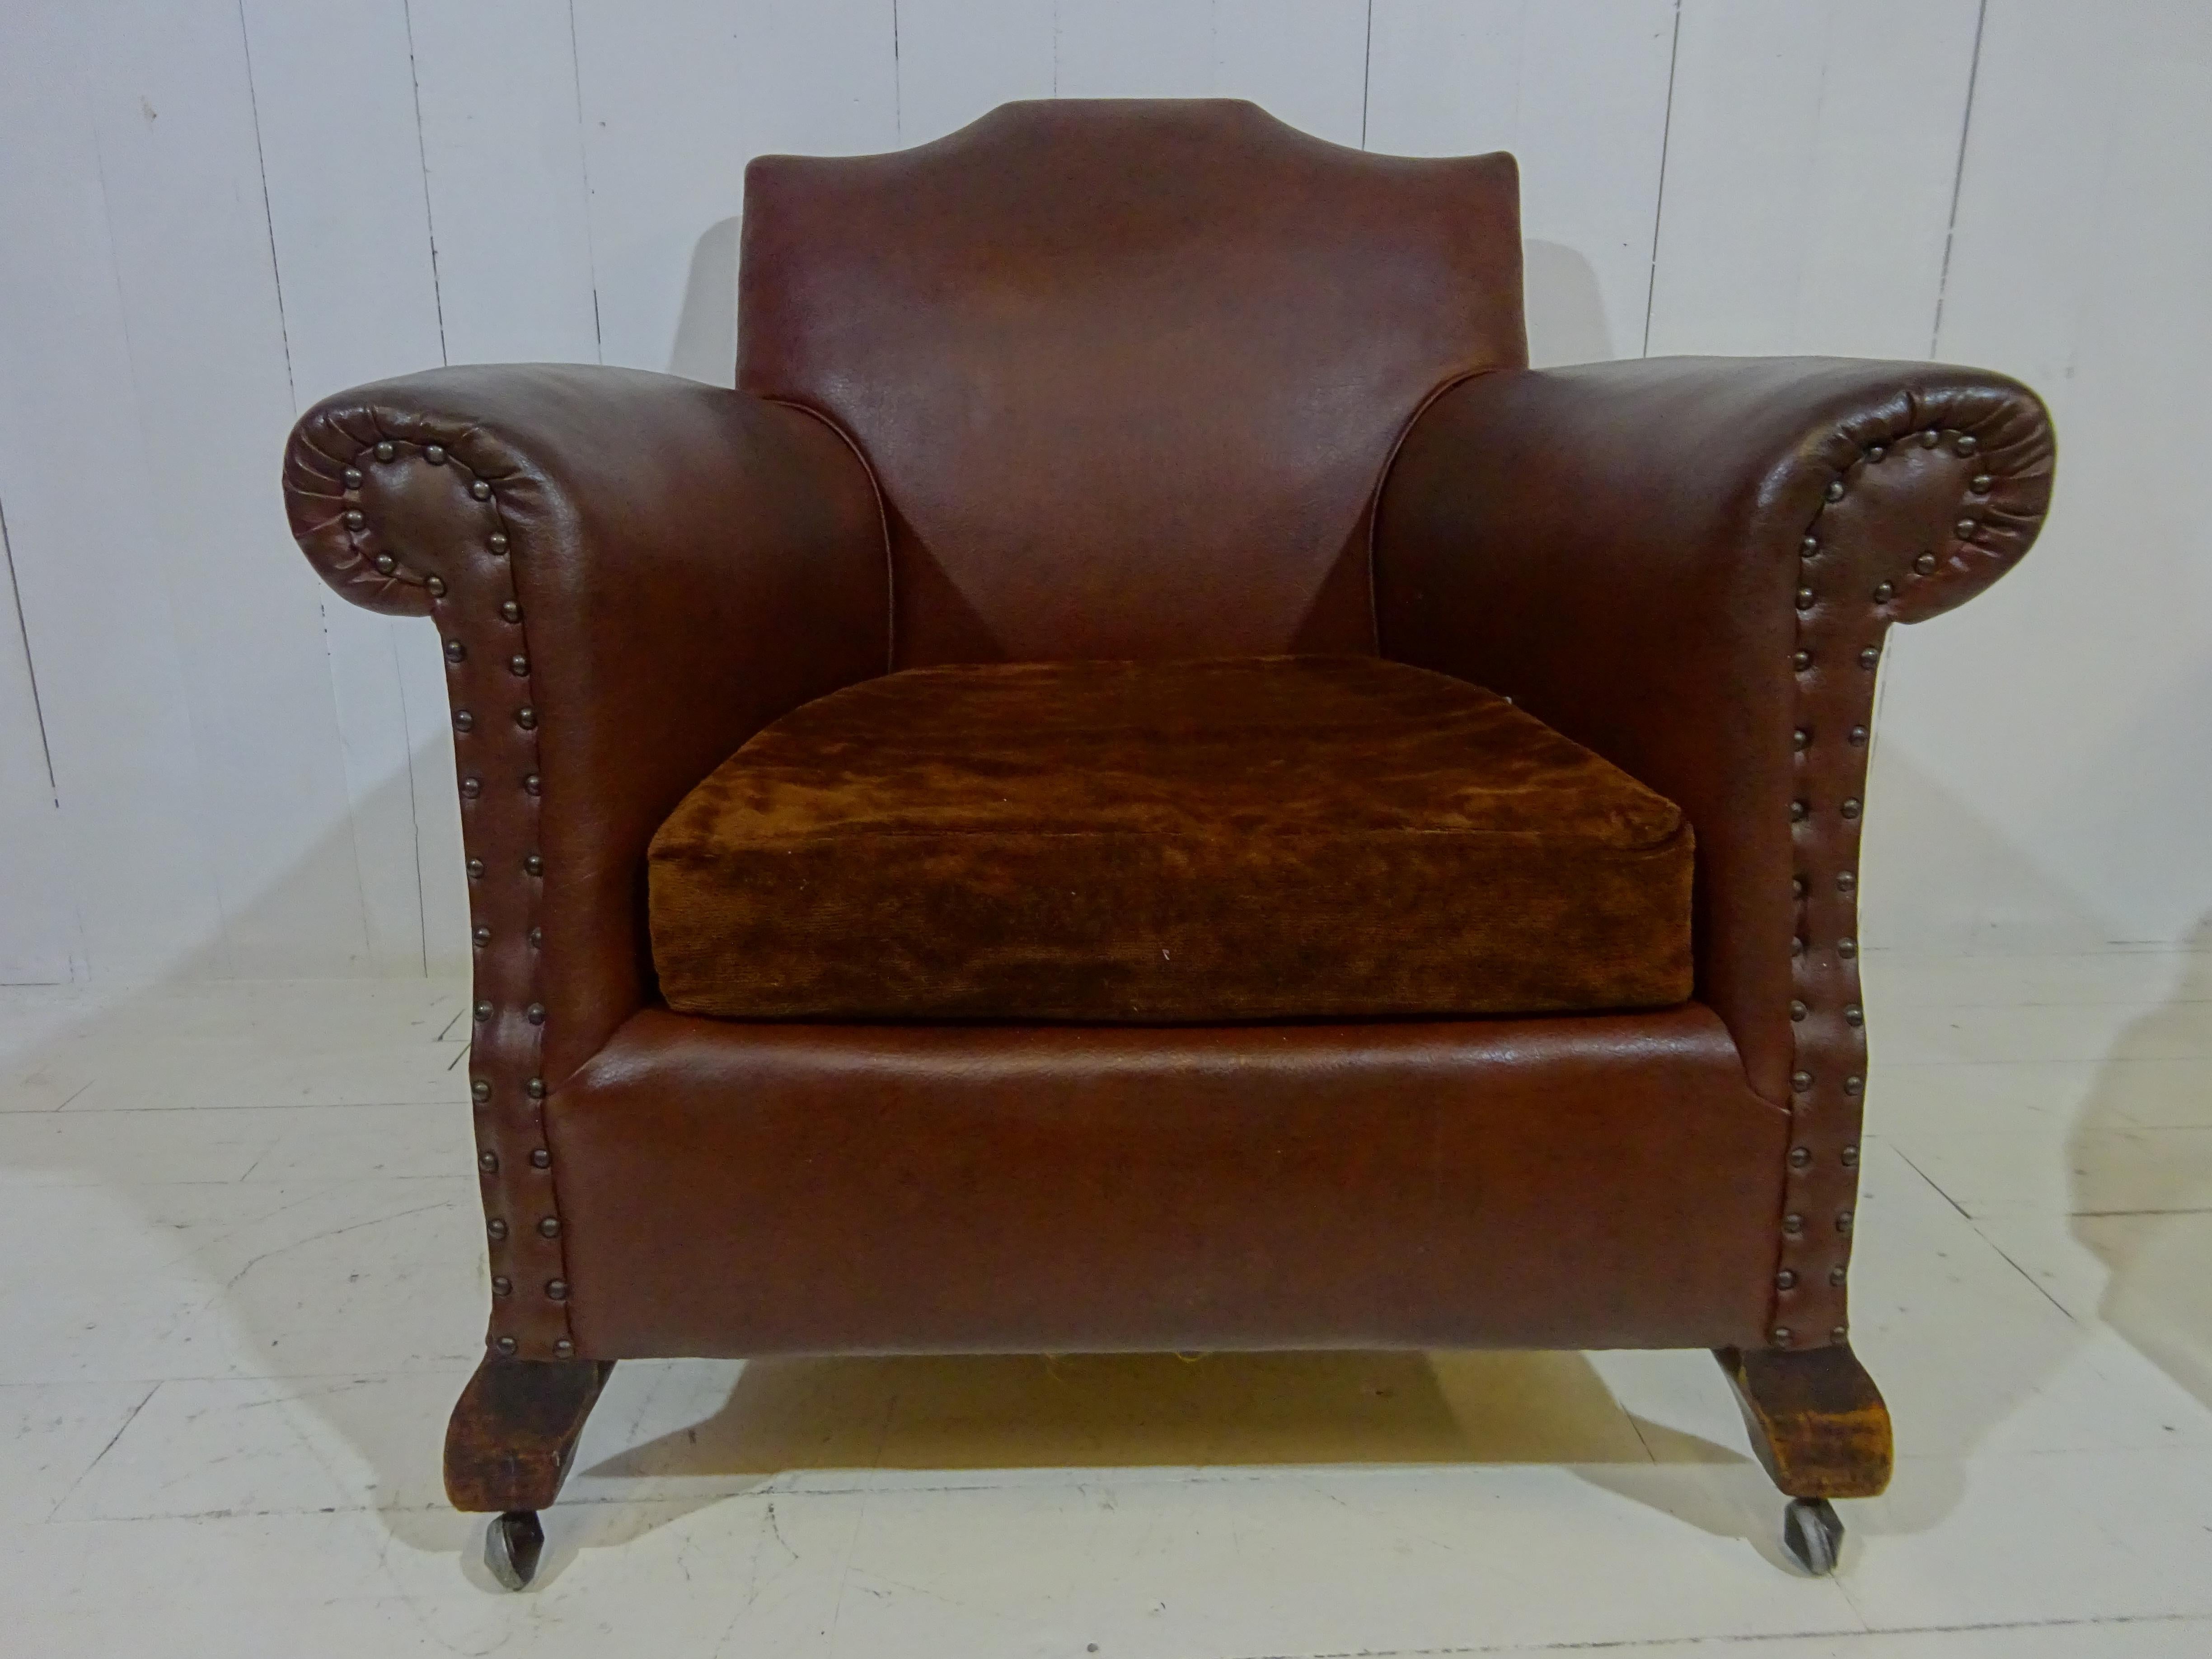 Early 20th Century Original 1920's Art Deco Club Chair in Brown Faux Leather